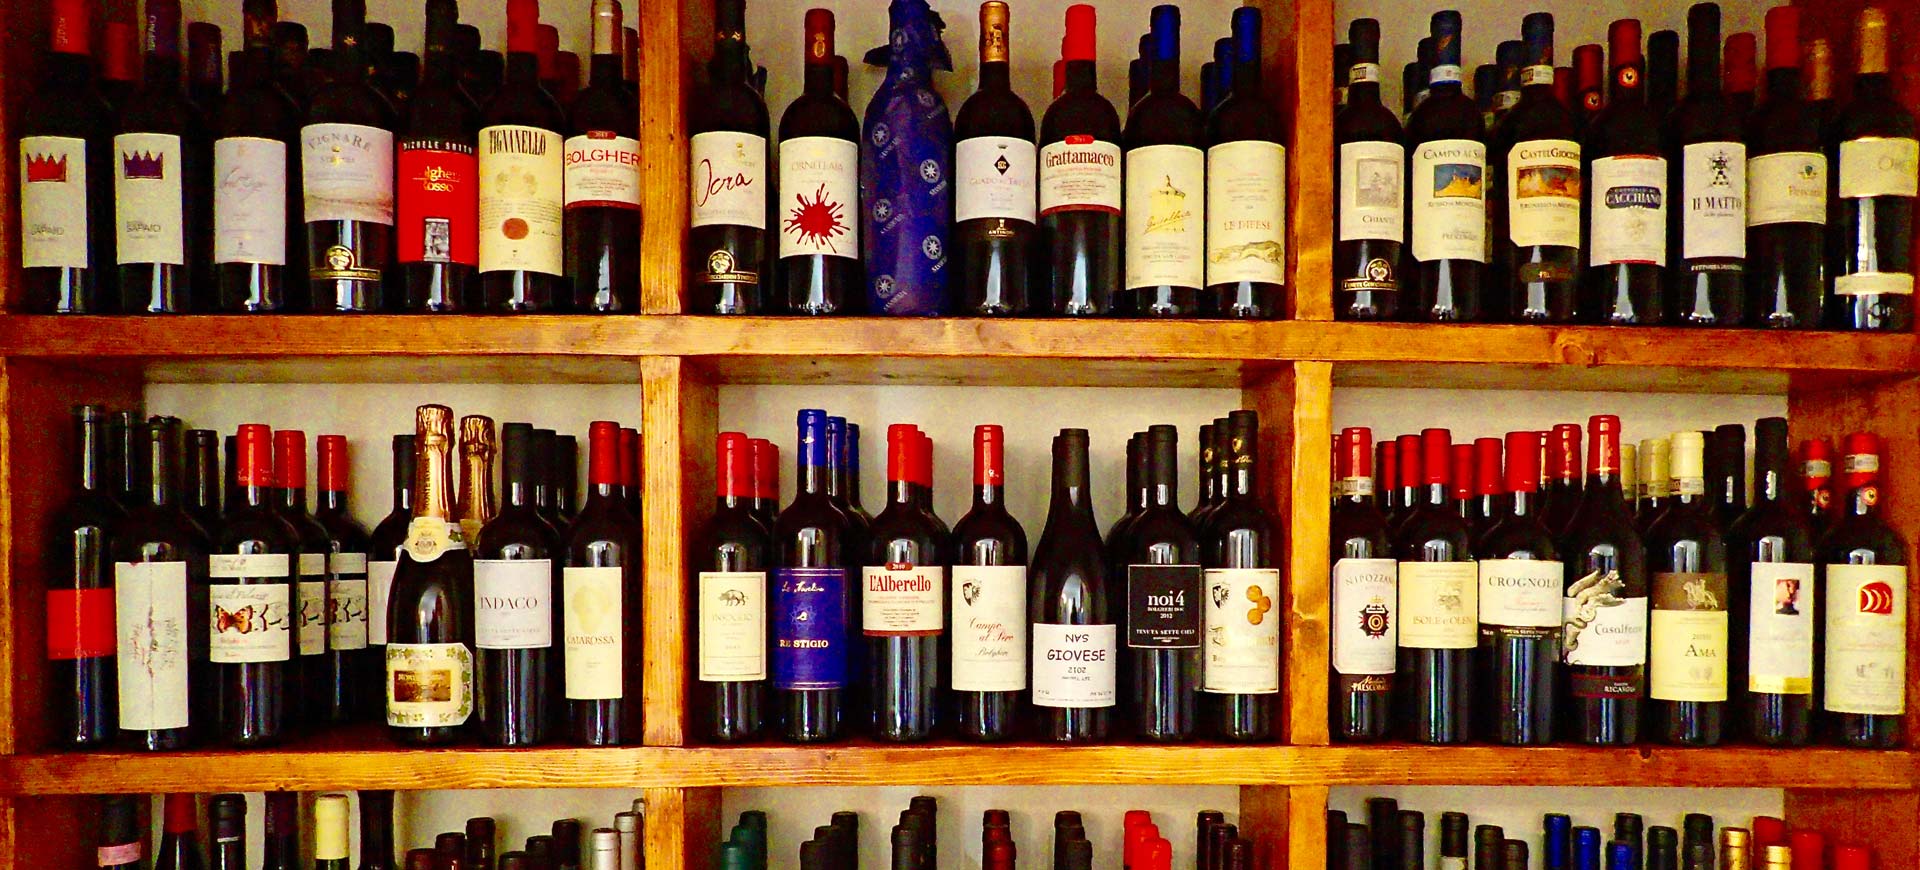 Wine bottles of Sassicaia, and other Bolgheri wineries